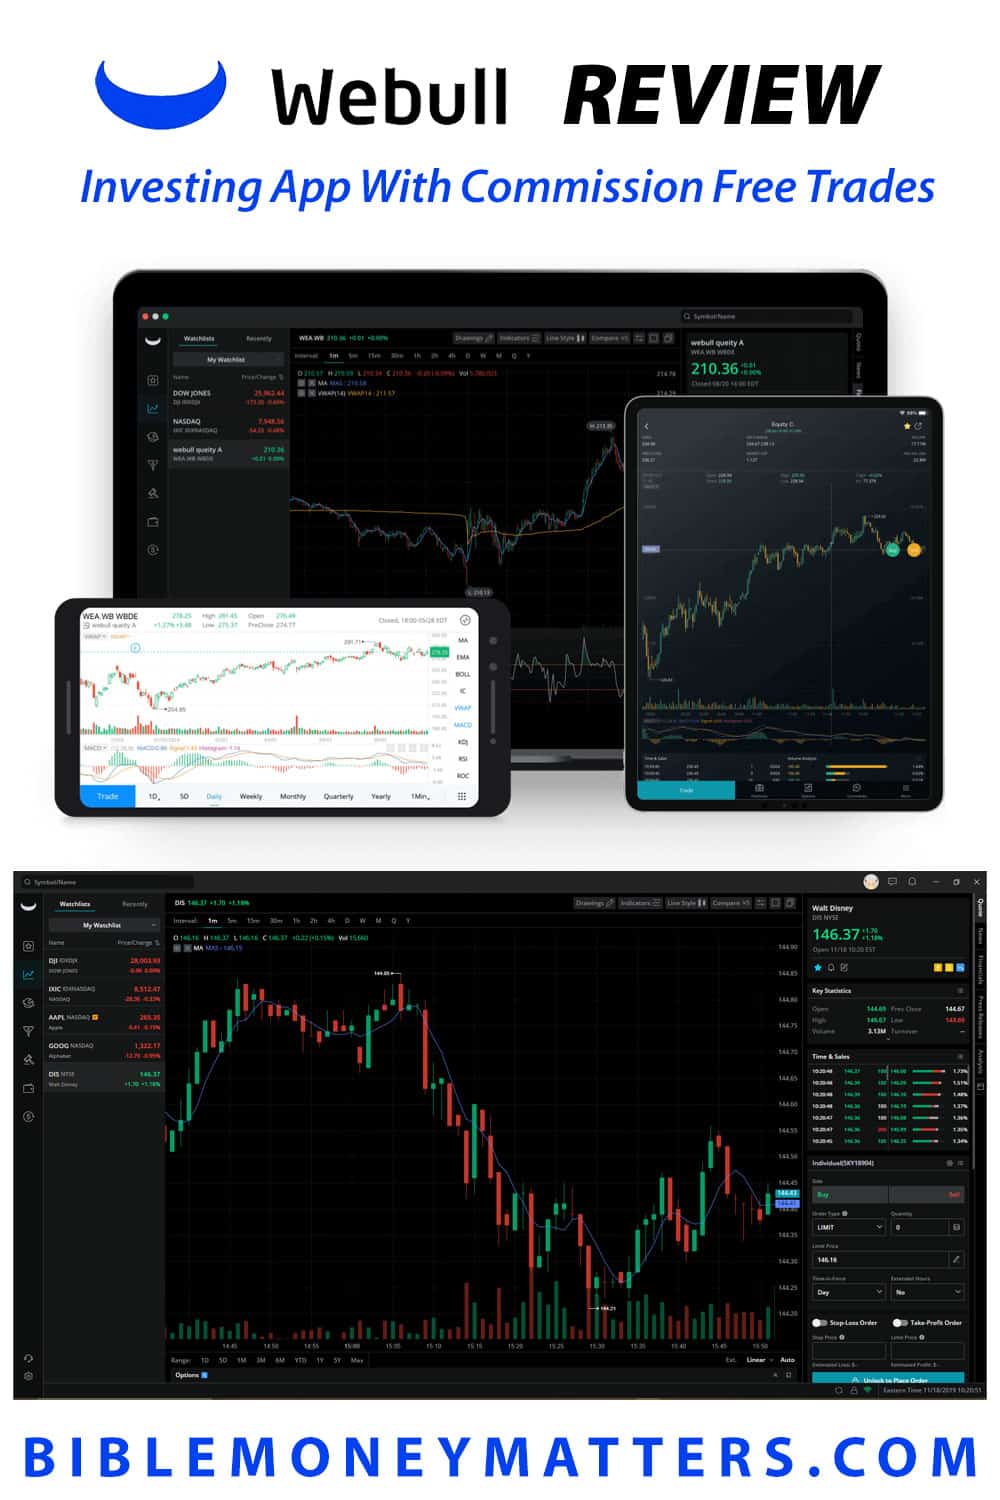 Webull Review: Investing App With Commission Free Trades